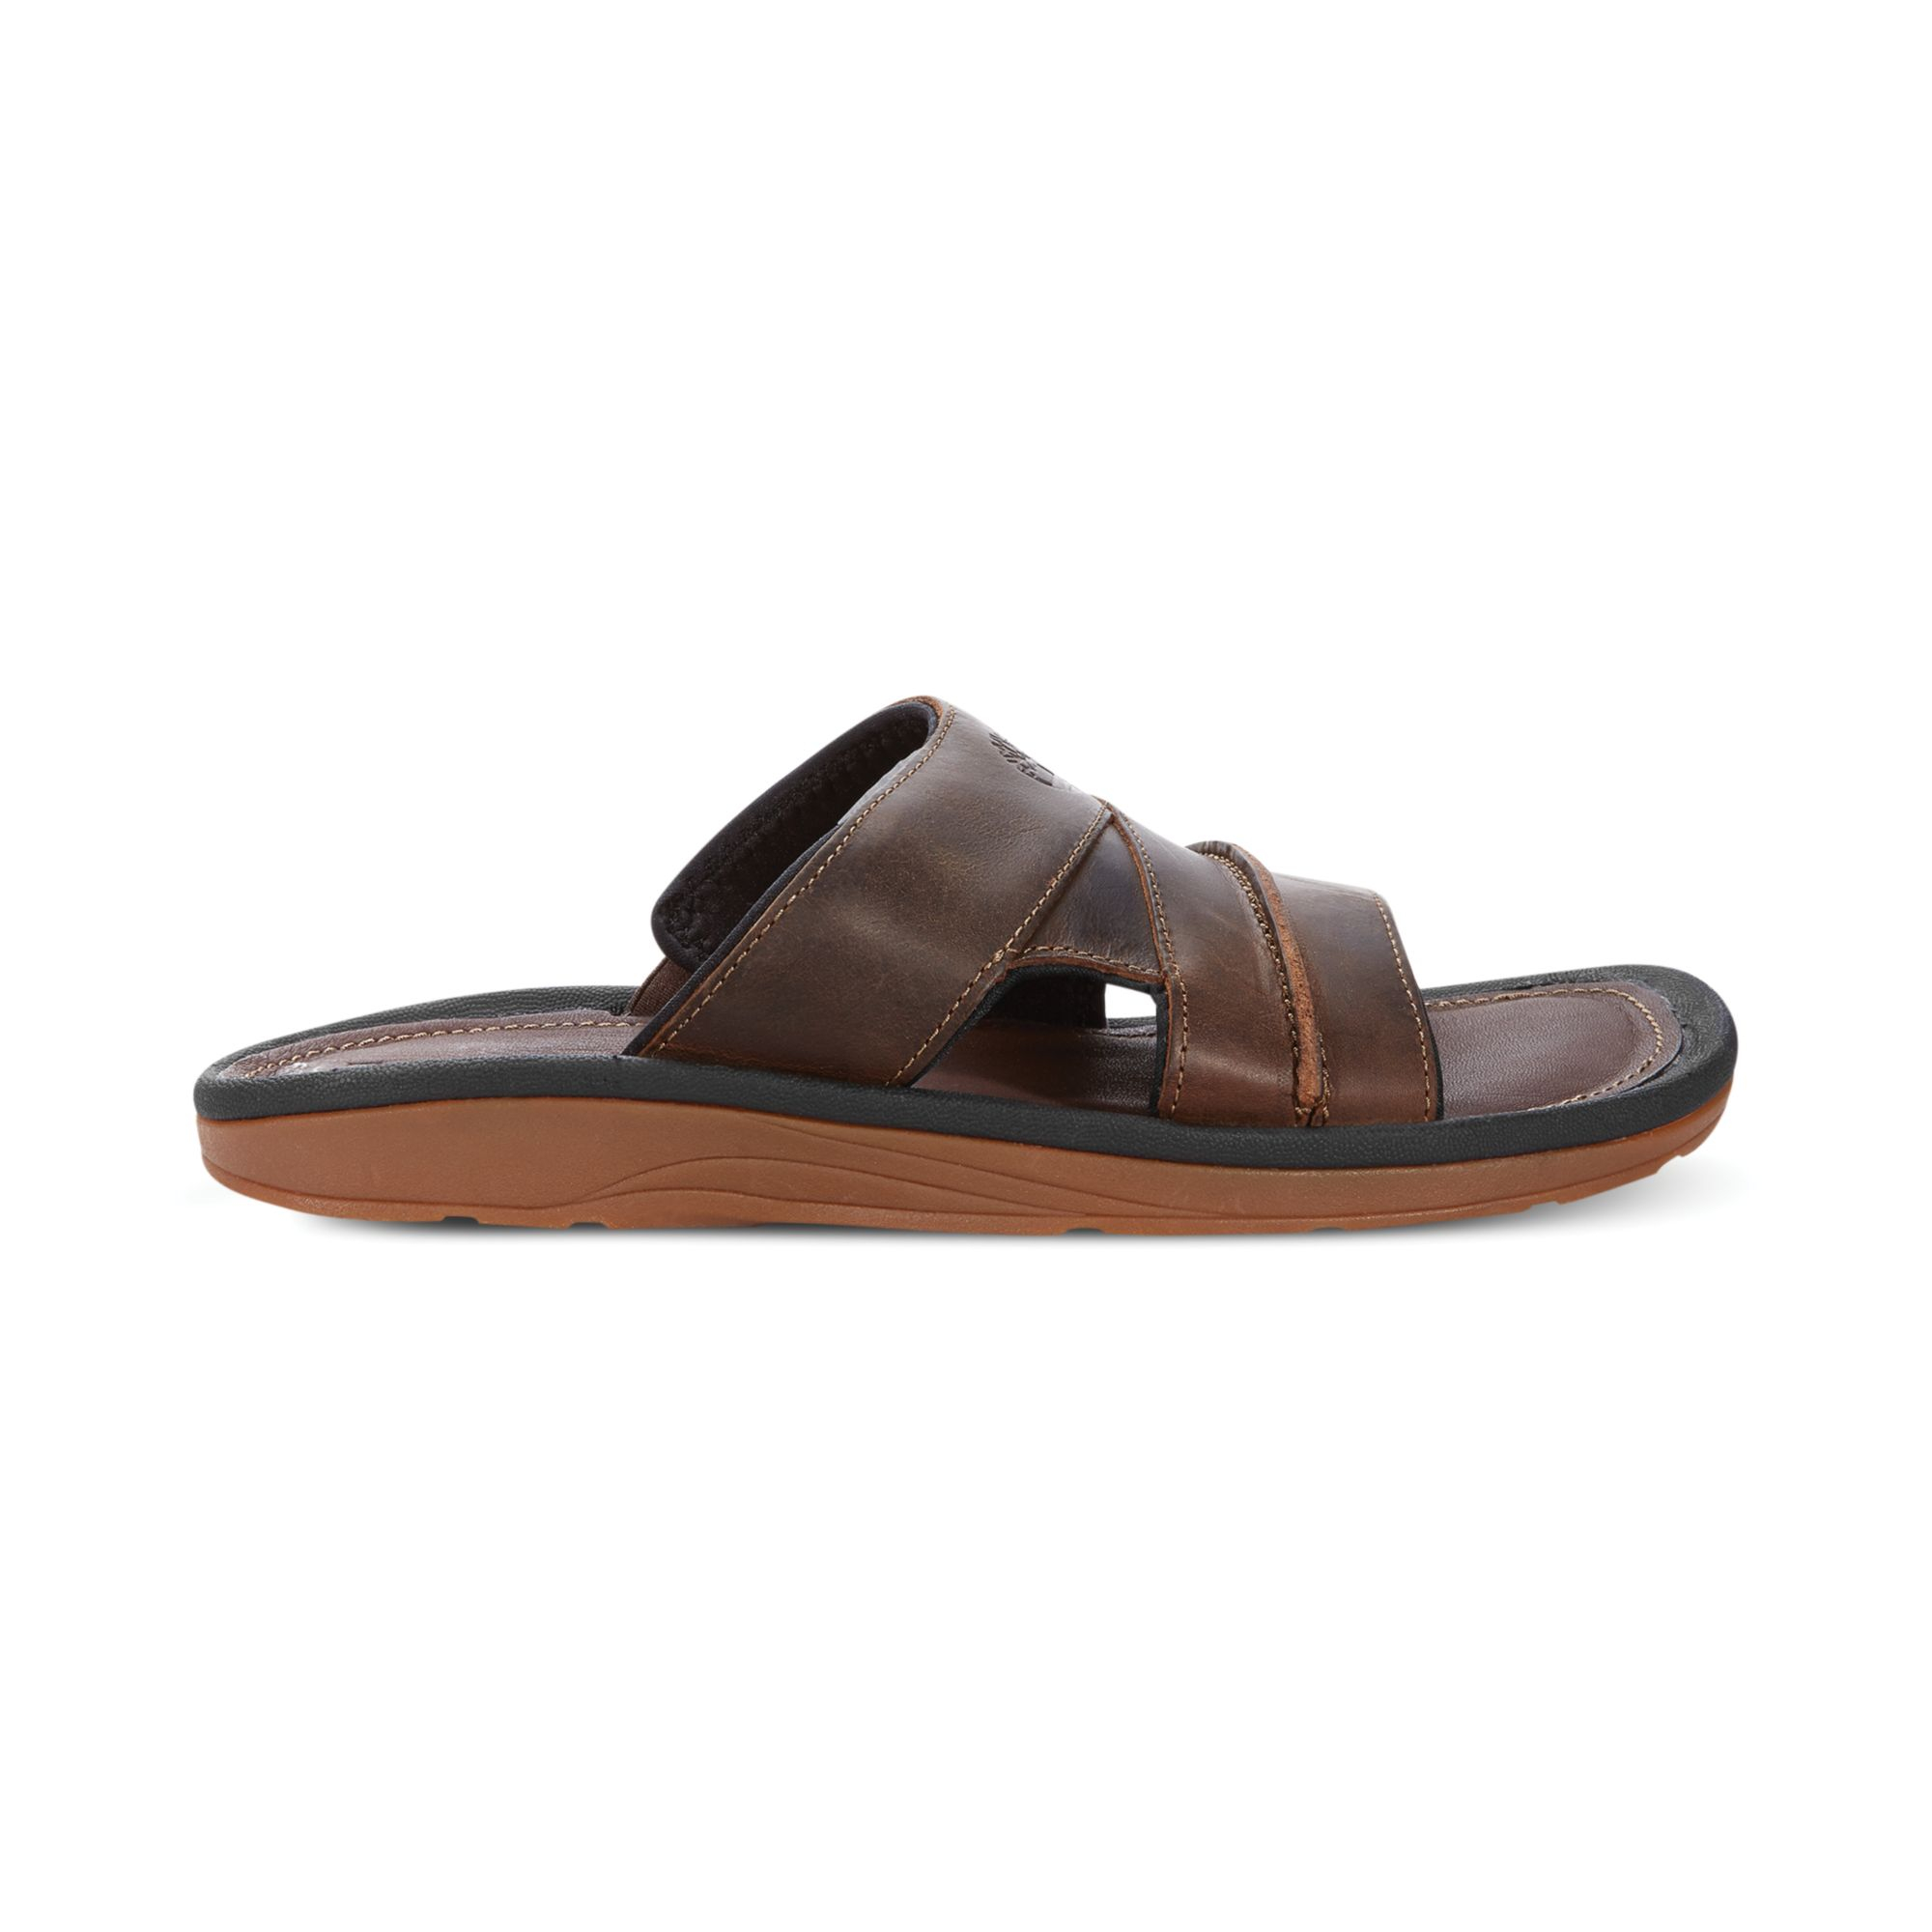 Timberland Earthkeepers Rugged Slide Sandals in Brown for Men - Lyst